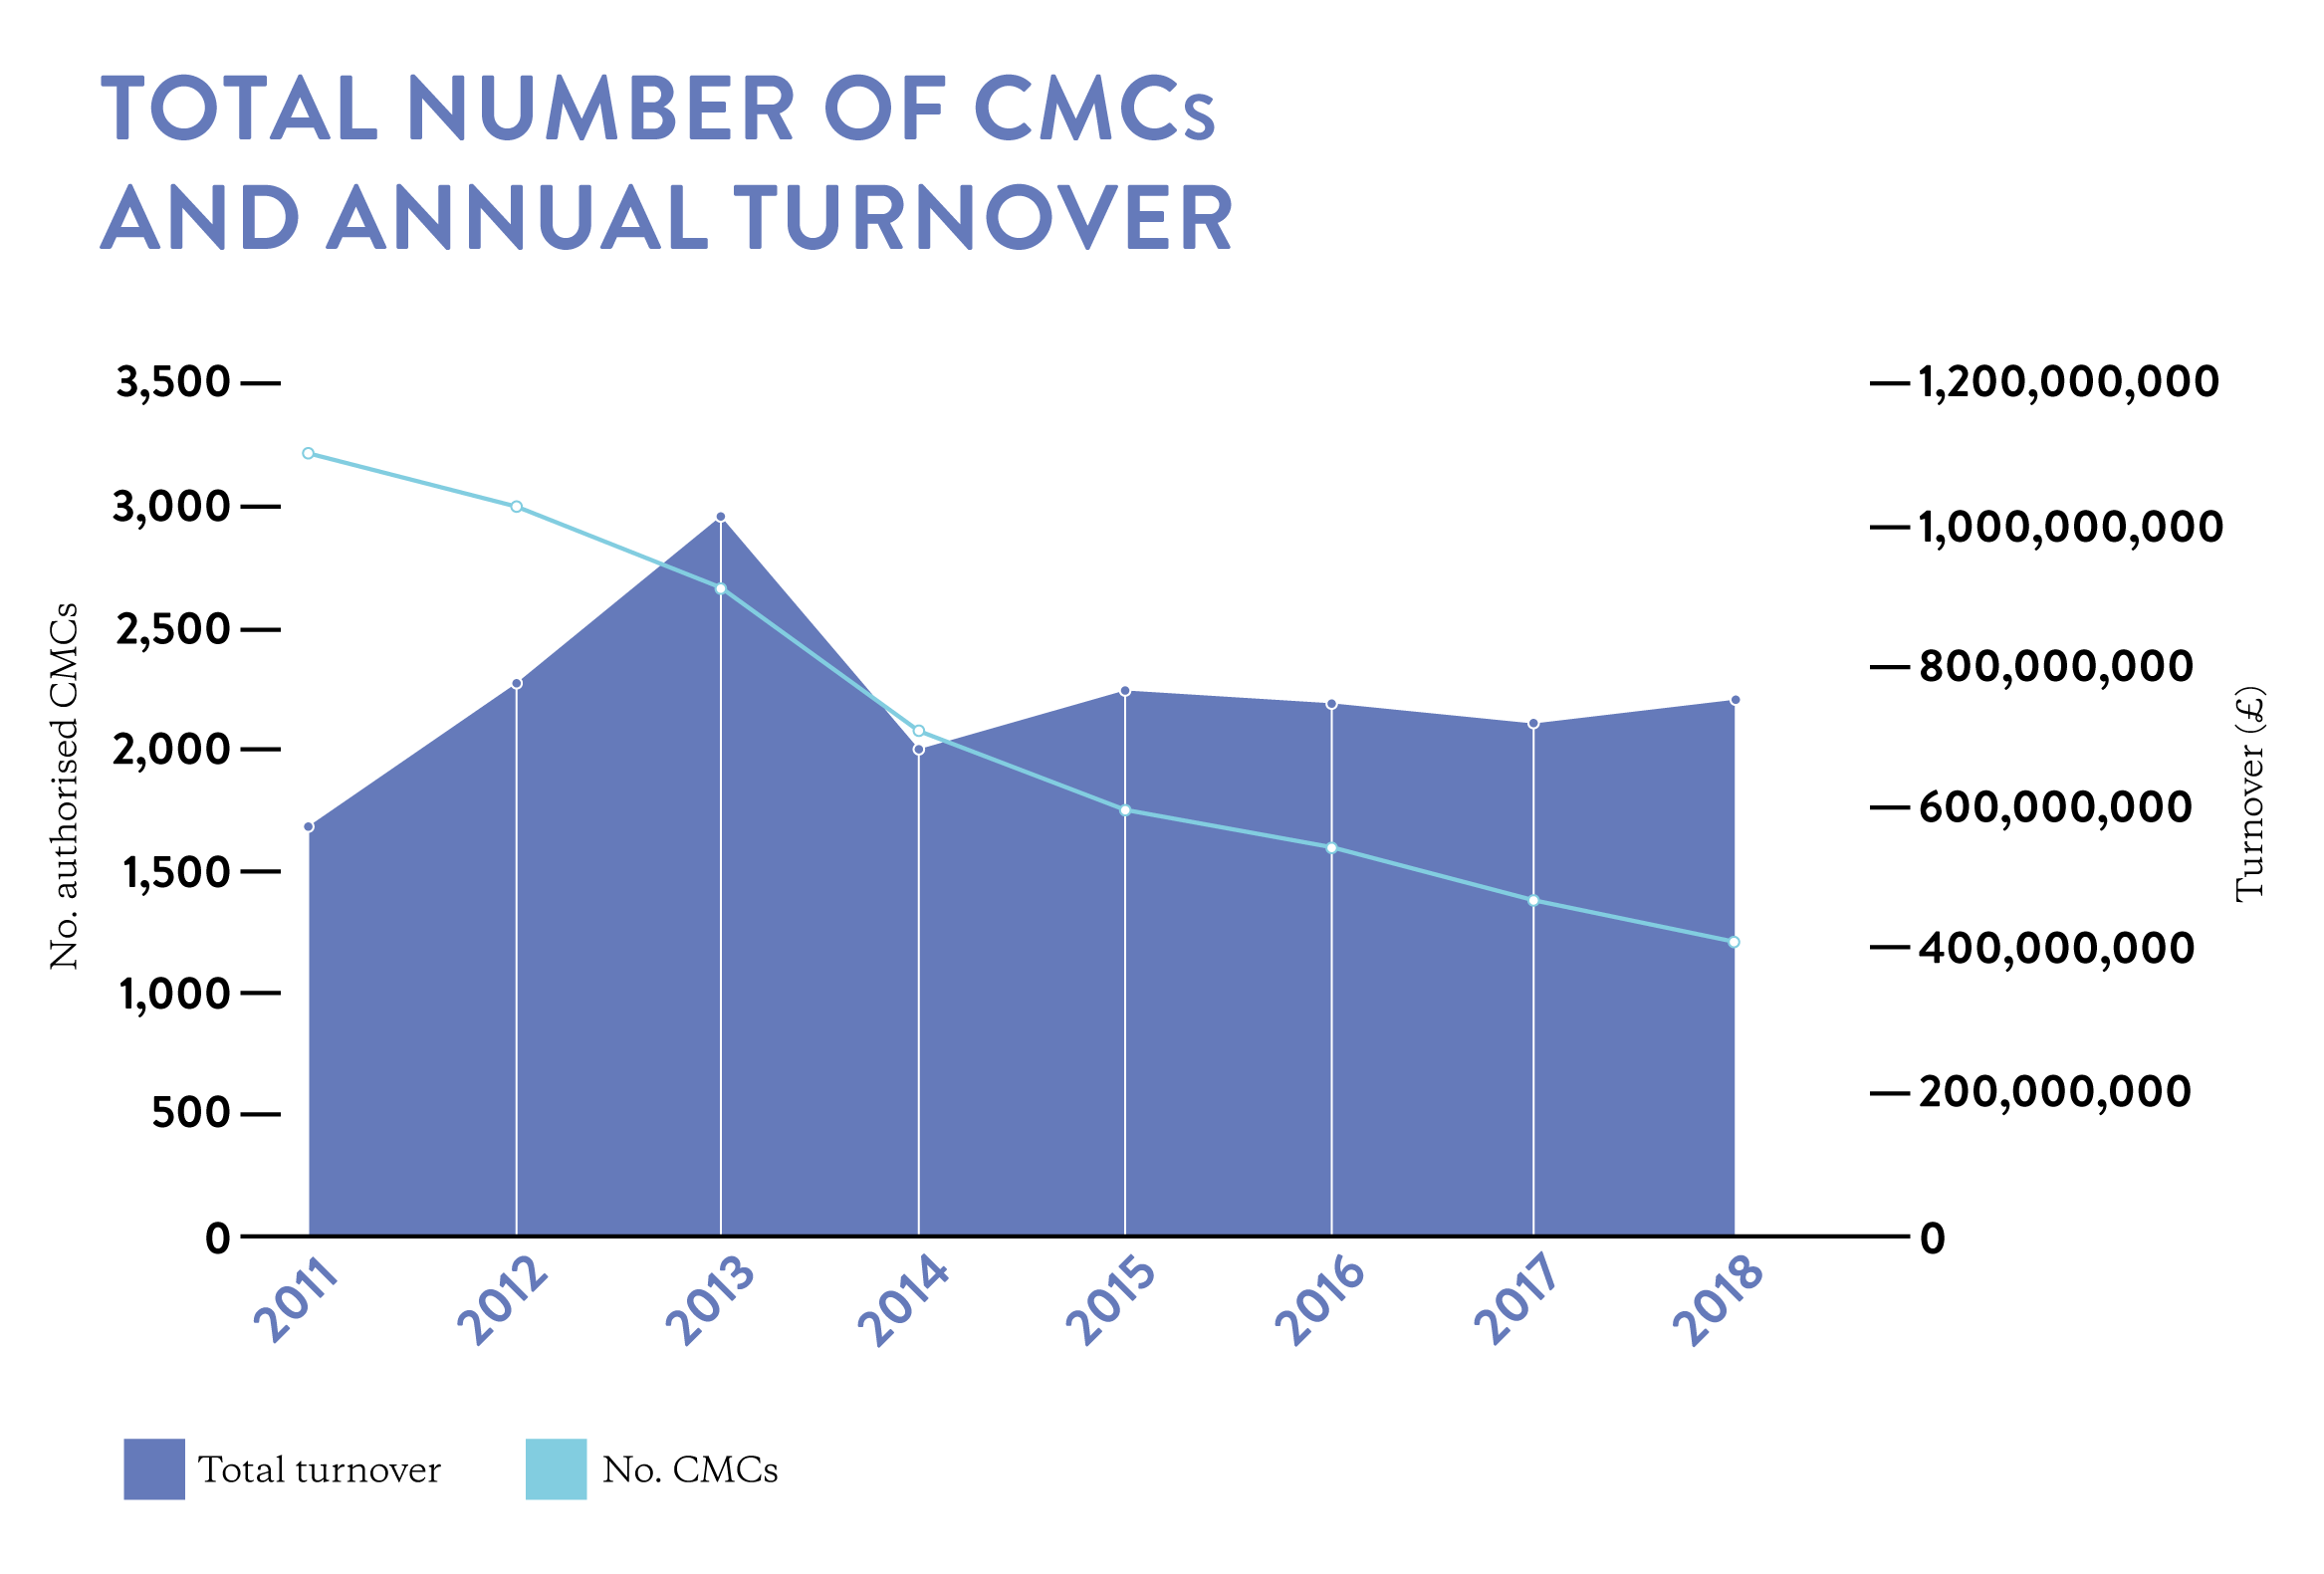 Total number of CMCs compared to turnover